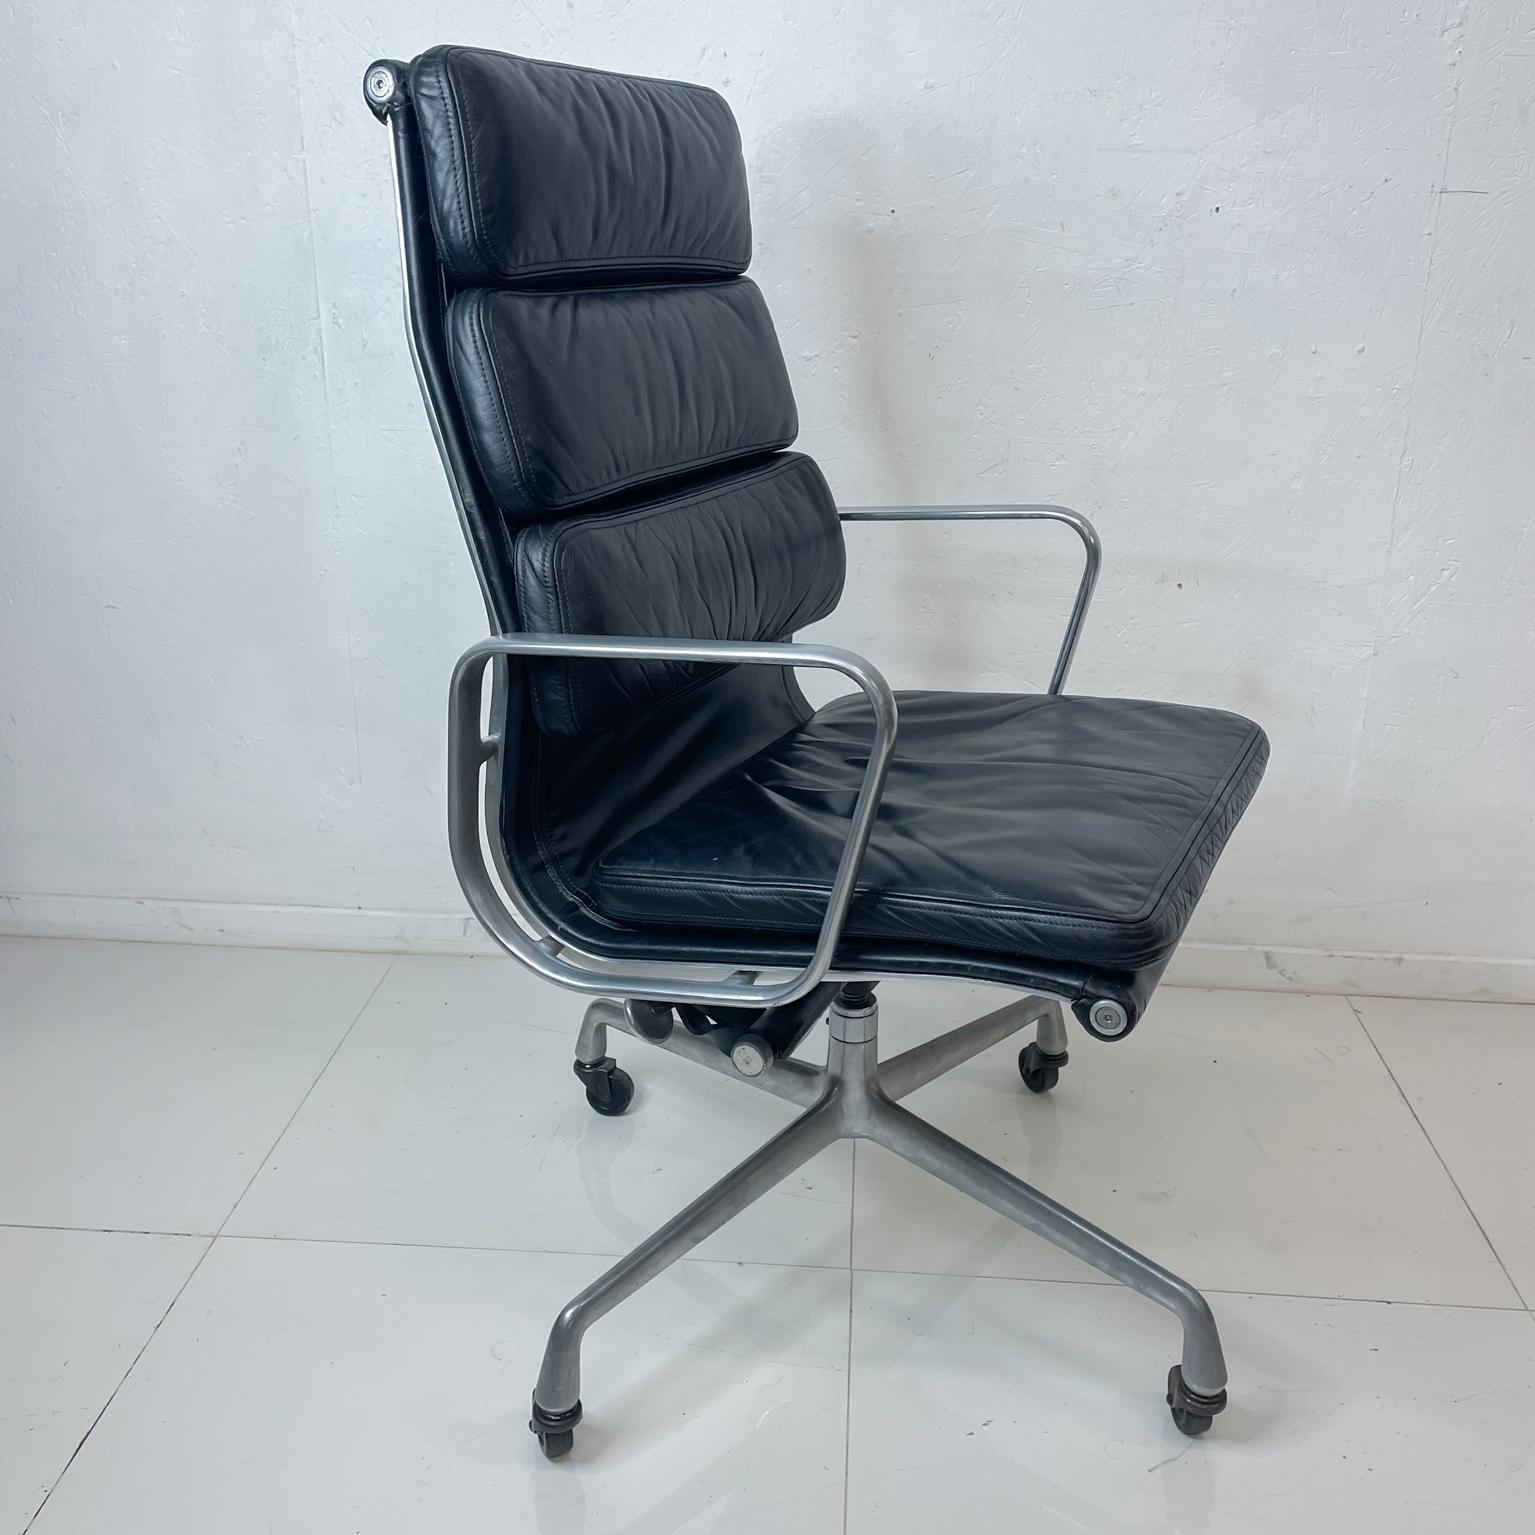 American 1978 Original Herman Miller Eames Soft Pad Executive Chair Black Leather